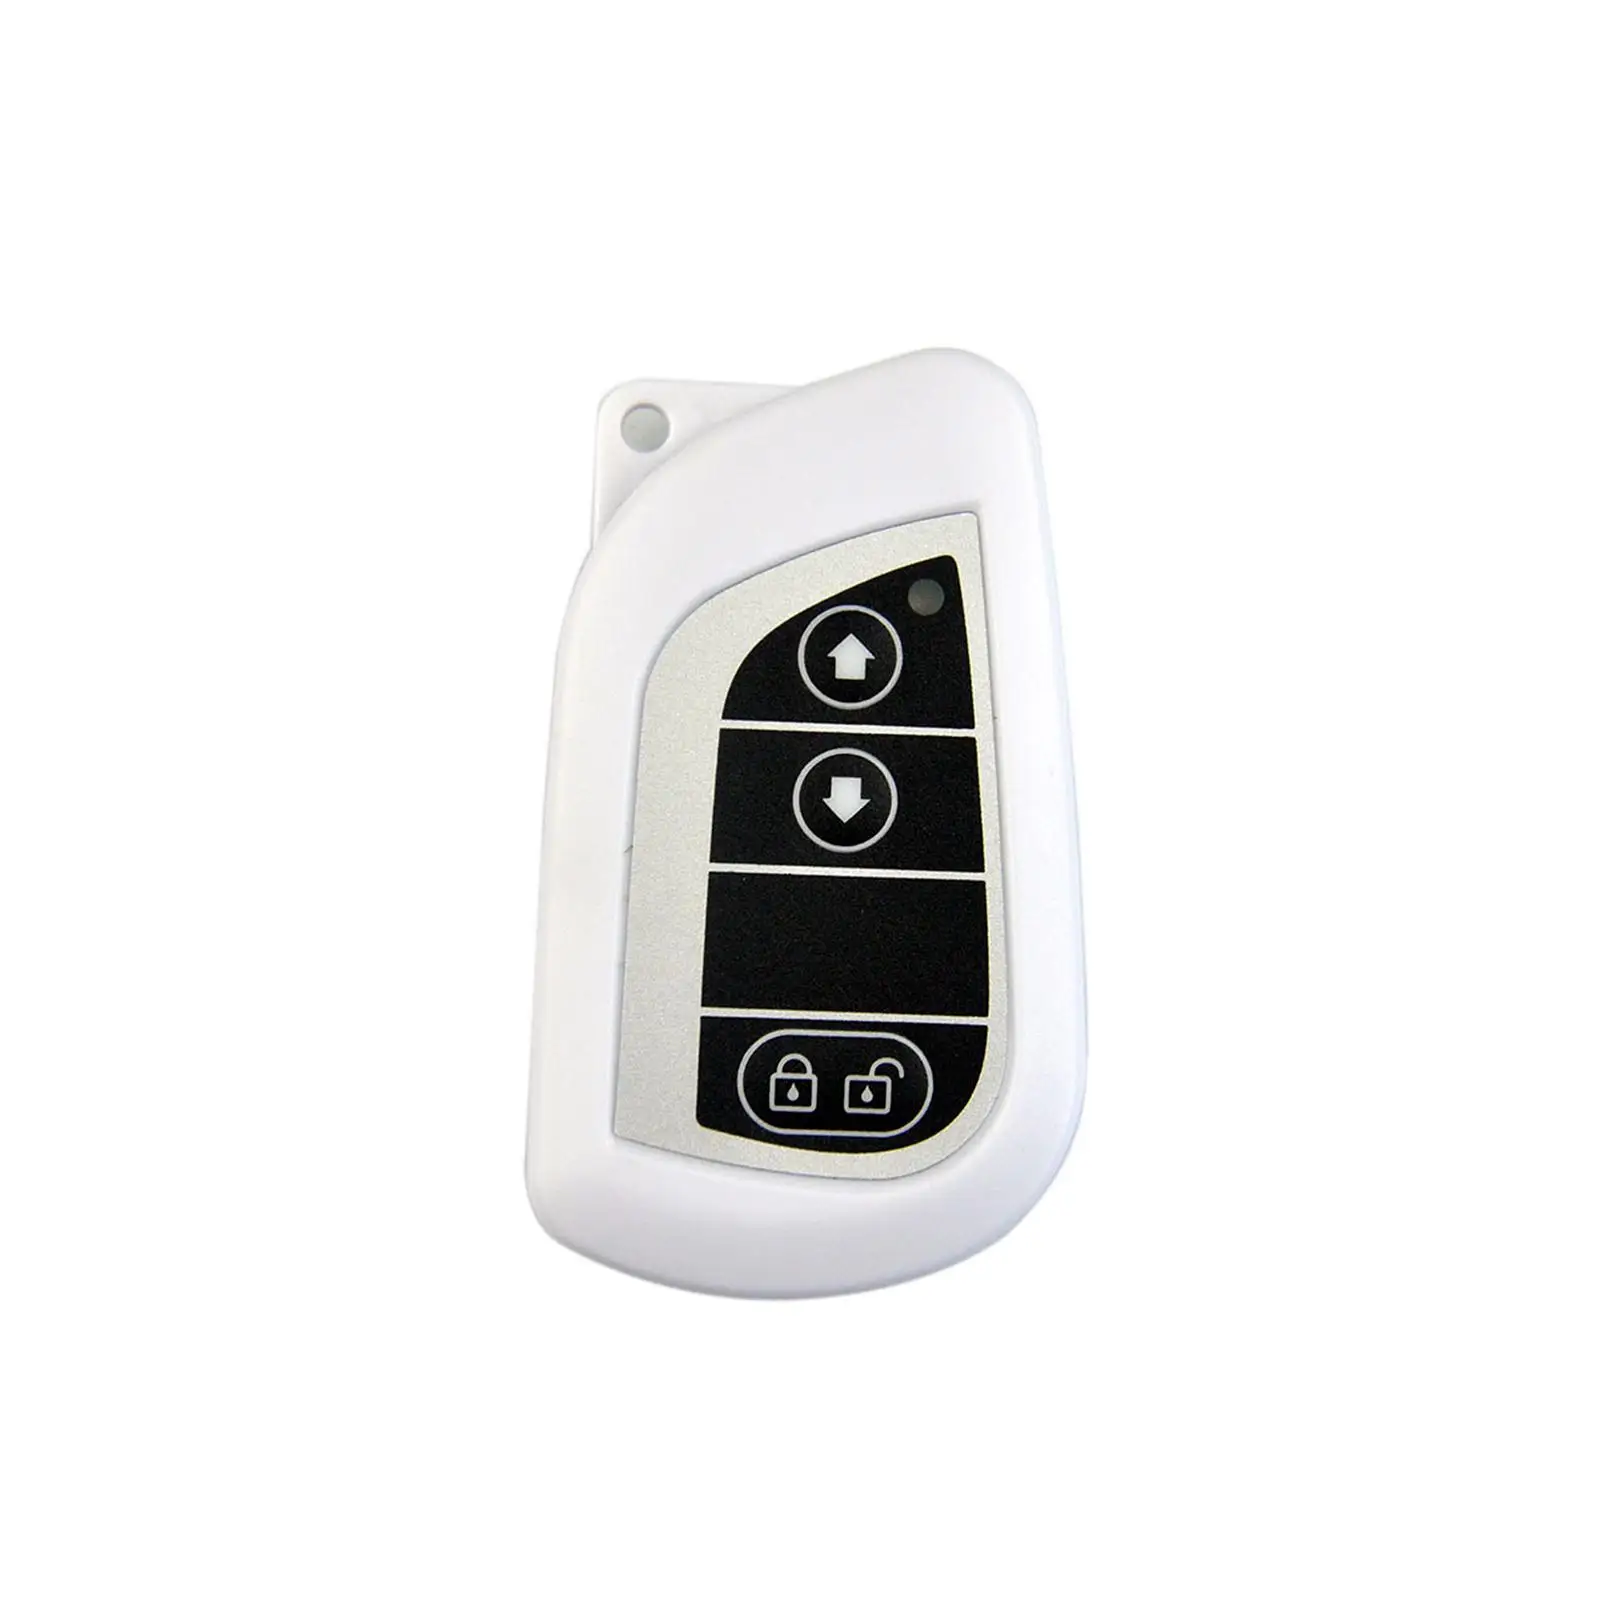 Electric Vehicle Bluetooth Remote Control Small Replacement Fitments Sturdy for 3~8 Year Old Kids Powered Ride on Cars Remote